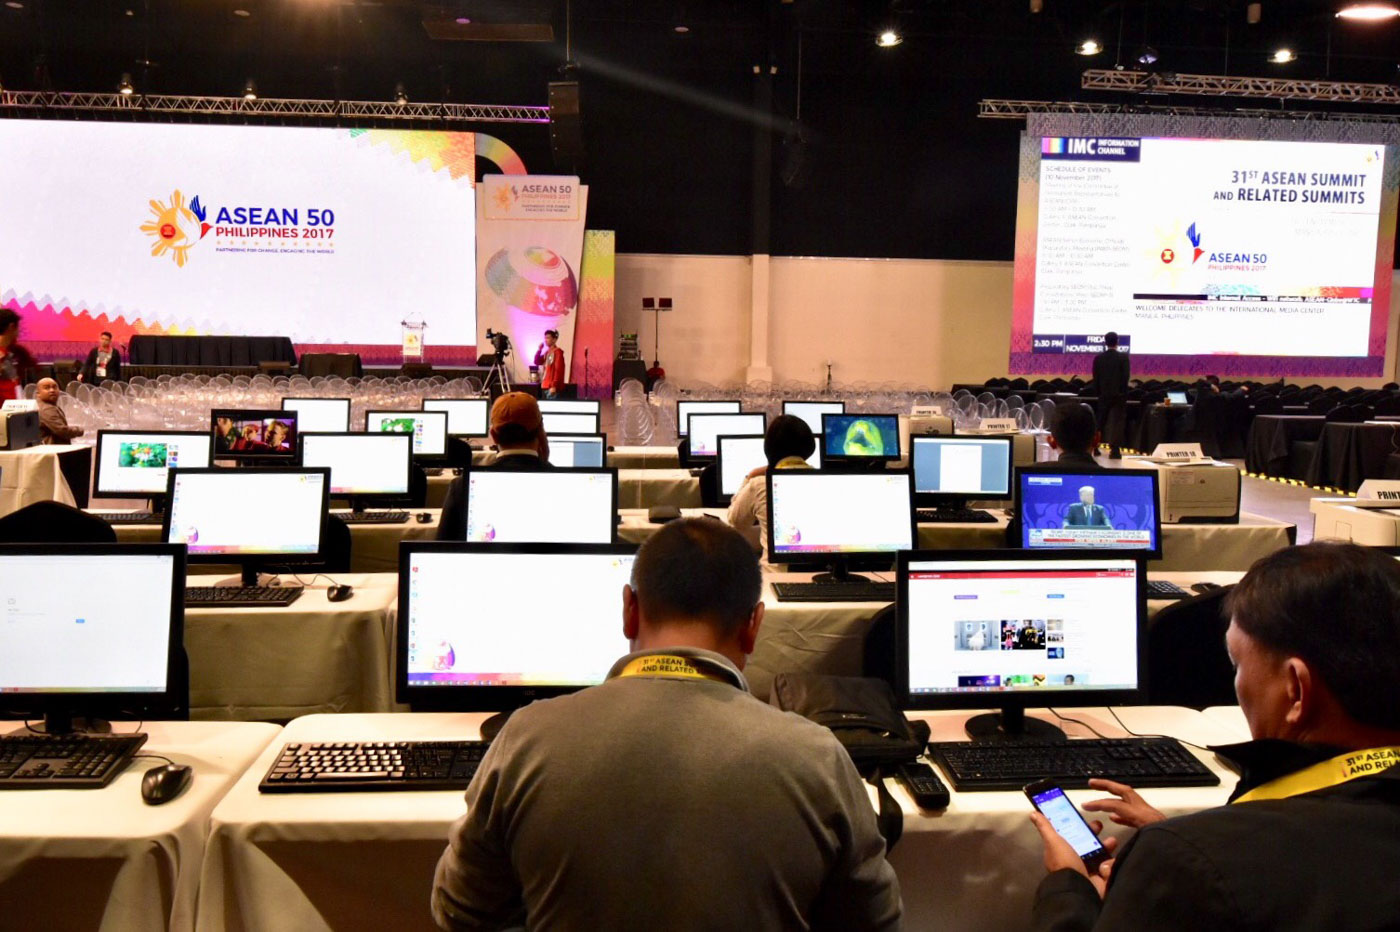 ASEAN 2017. Delegates of Philippine and international media work at the World Trade Center in Pasay which was transformed to the International Medie Center for the ASEAN 2017. Photo by LeAnne Jazul/Rappler 